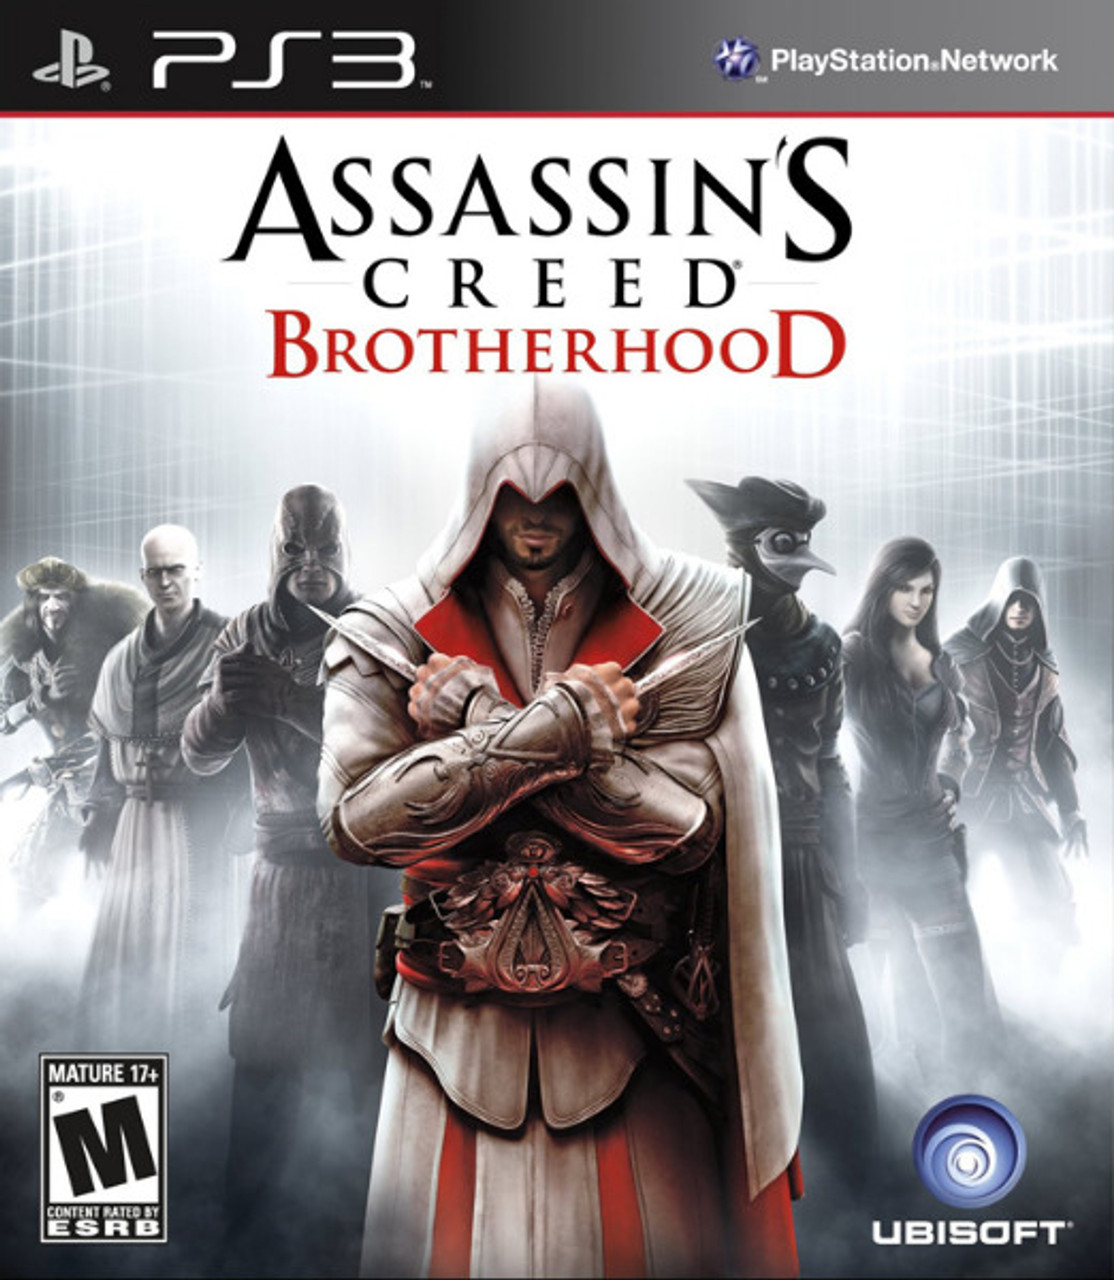 Assassin's Creed PS3